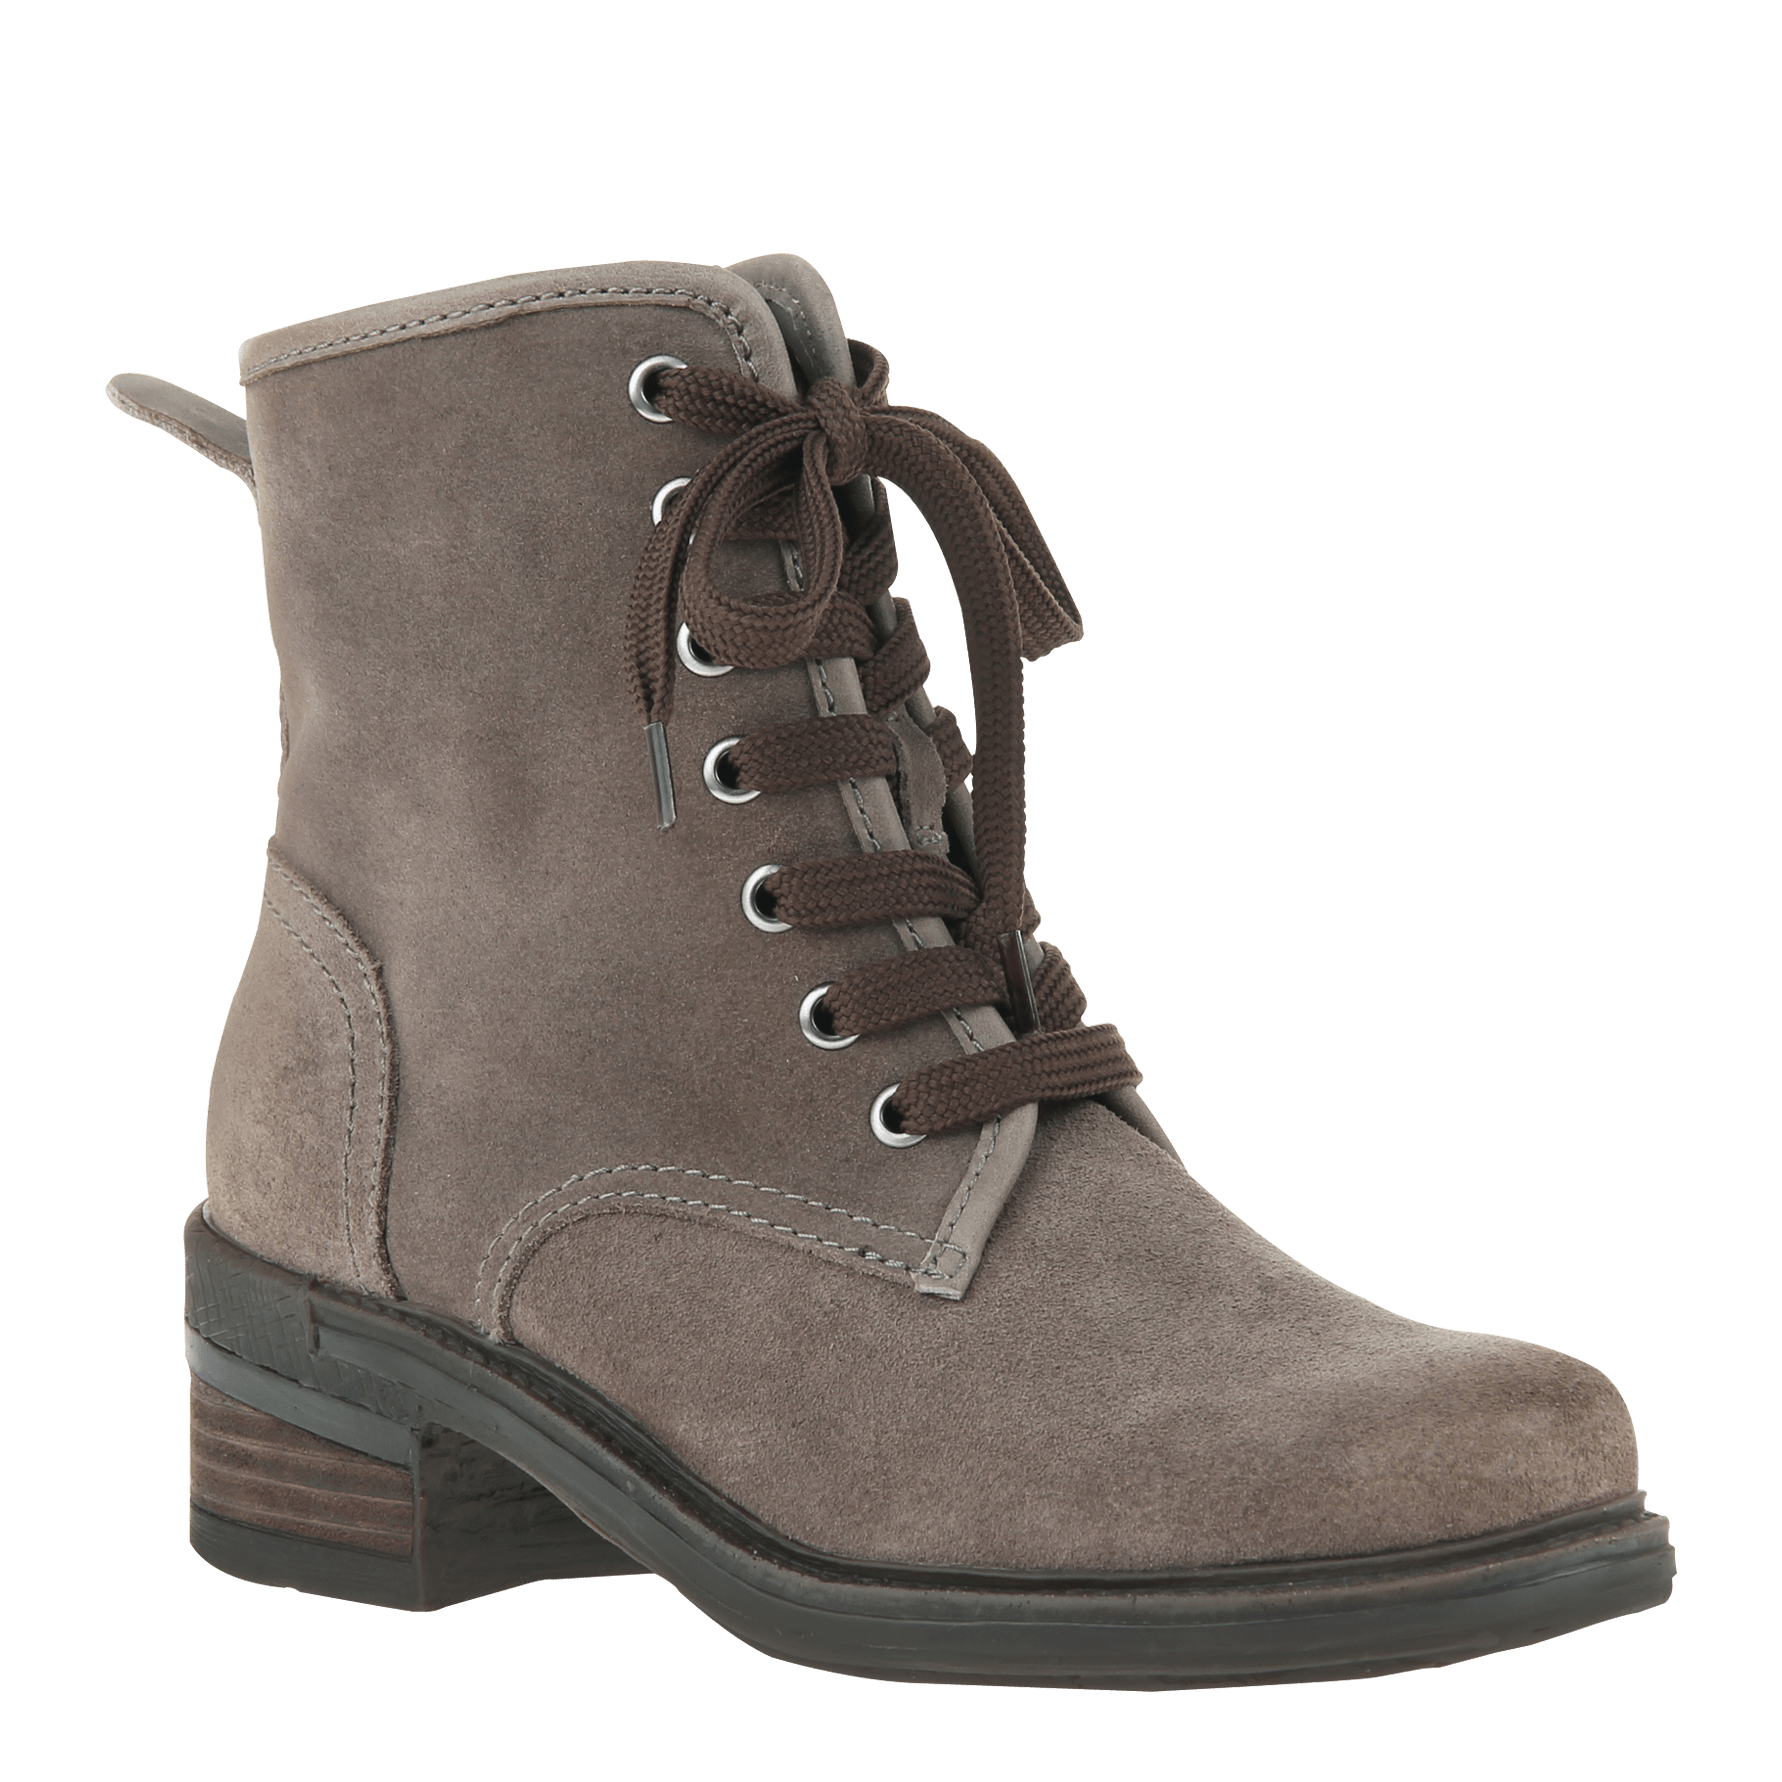 cold weather ankle boots